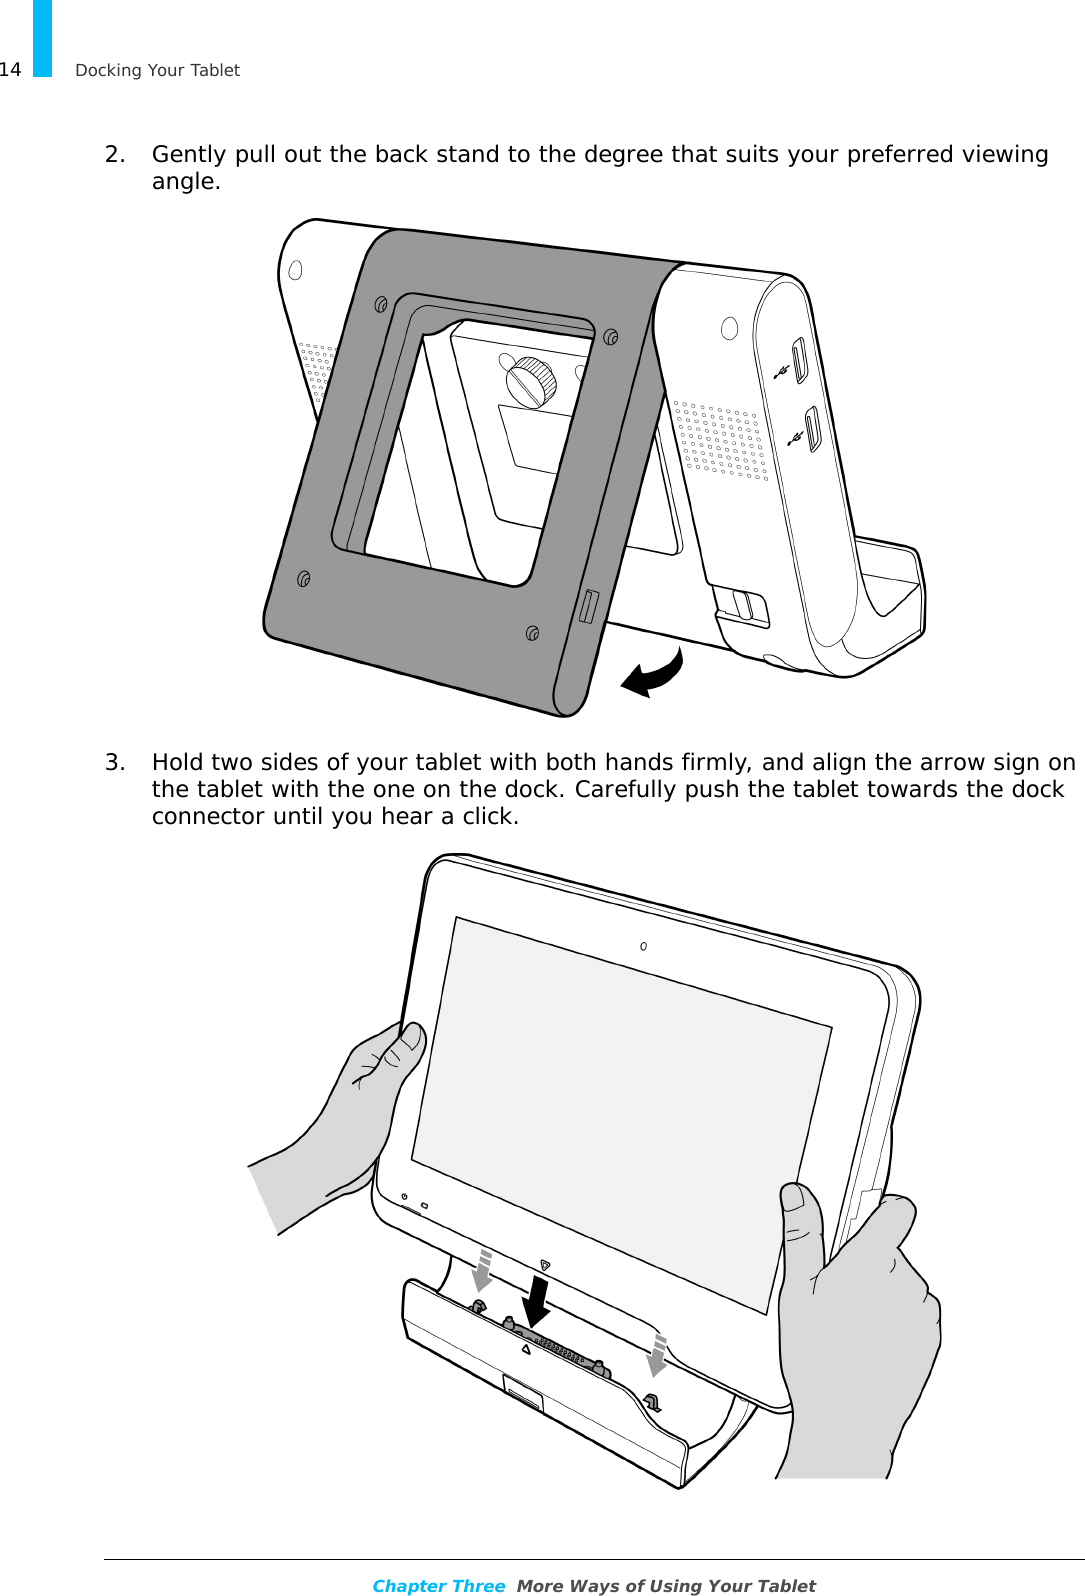 Docking Your Tablet14Chapter Three  More Ways of Using Your Tablet2. Gently pull out the back stand to the degree that suits your preferred viewing angle.3. Hold two sides of your tablet with both hands firmly, and align the arrow sign on the tablet with the one on the dock. Carefully push the tablet towards the dock connector until you hear a click.